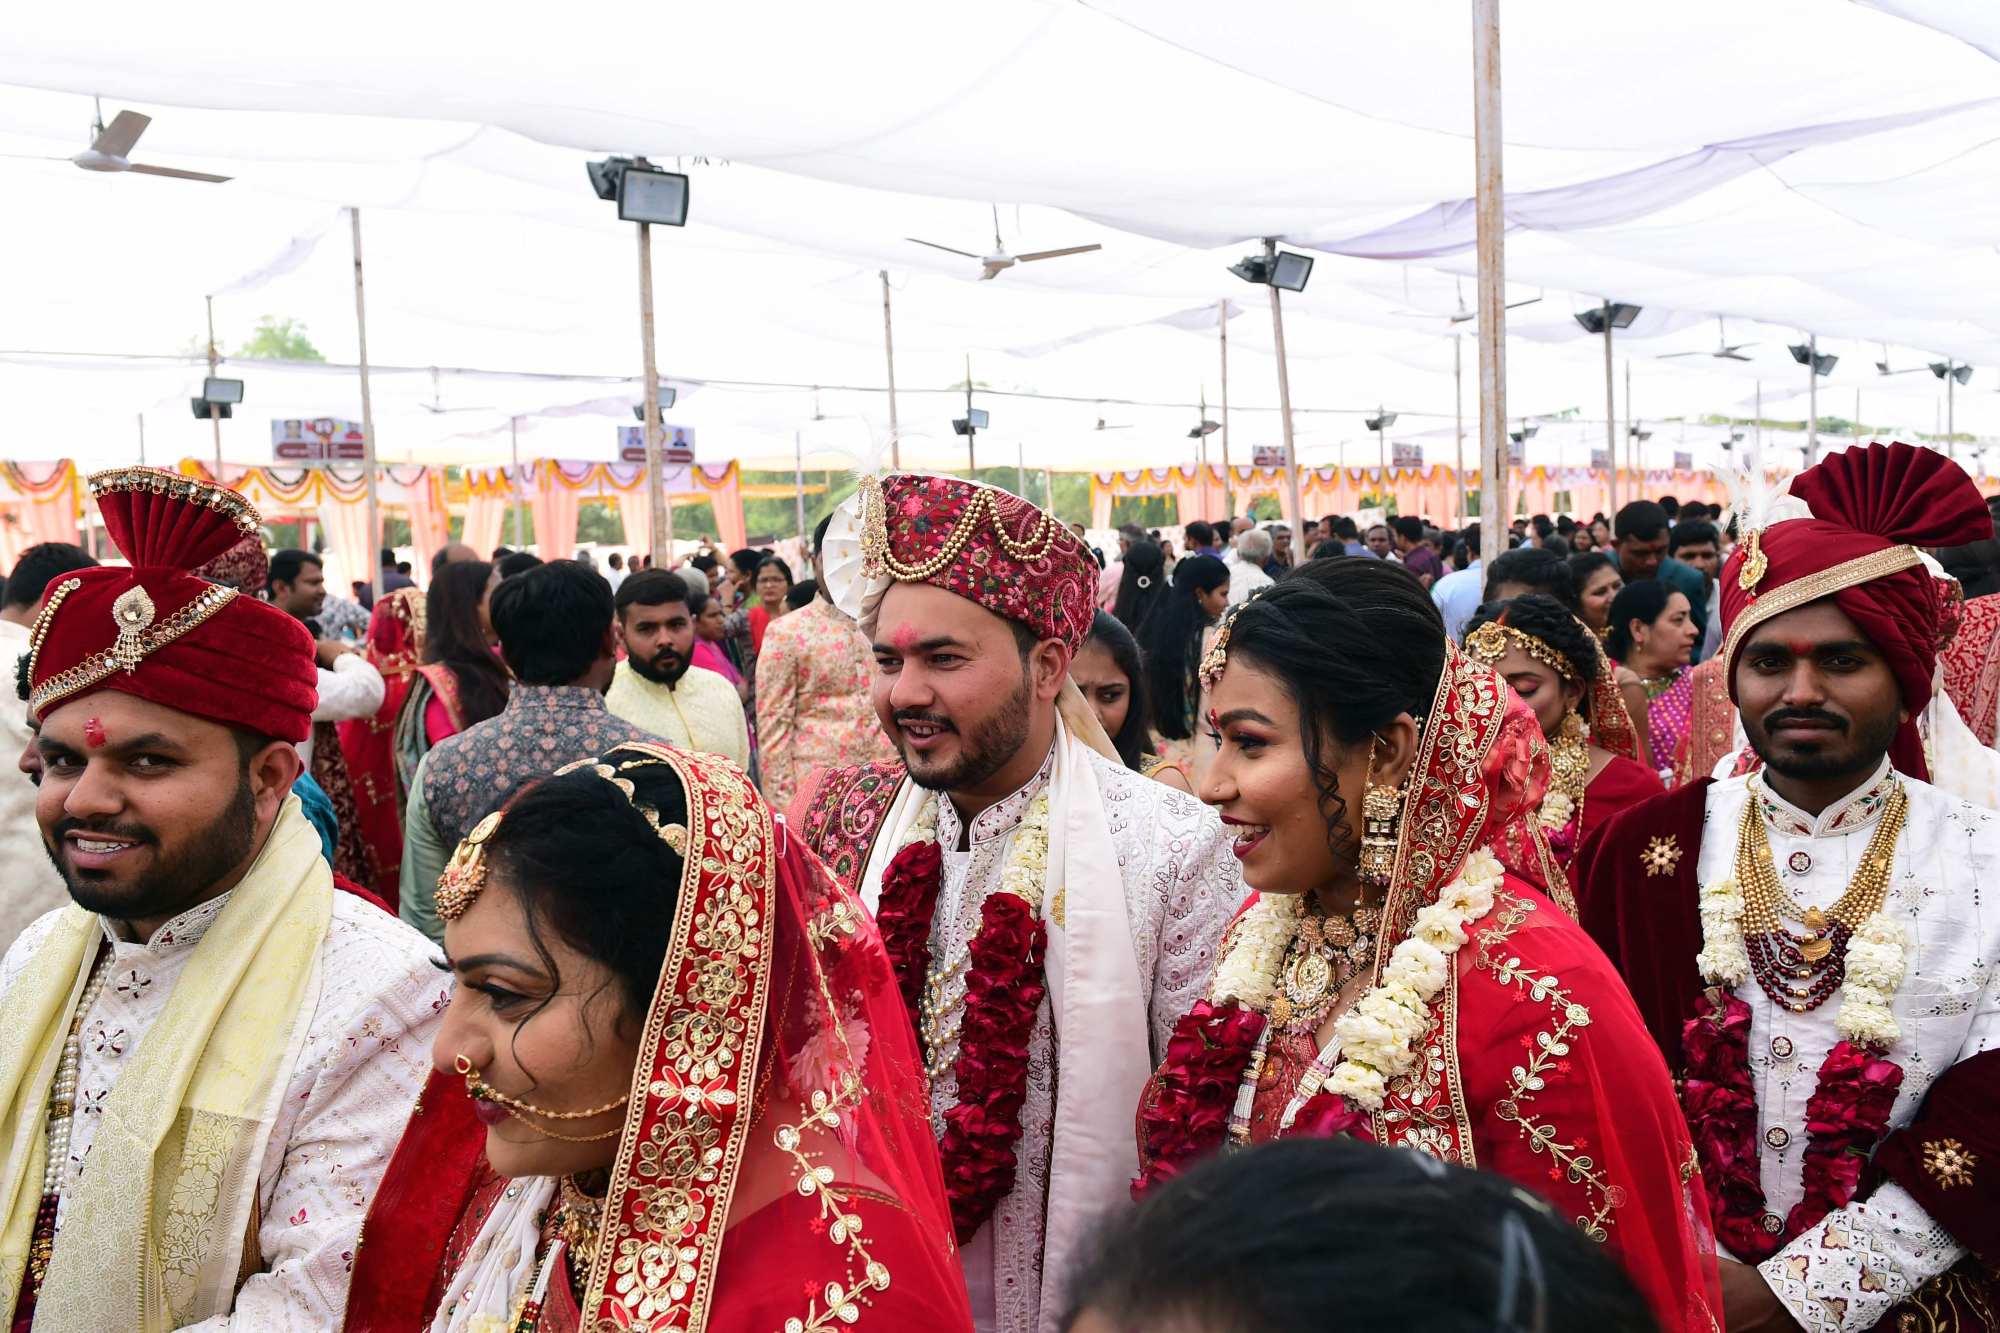 Hindu couples take part in a mass marriage ceremony on the outskirts of Ahmedabad on February 27. Late marriages are among the factors affecting India’s falling fertility rates. Photo: AFP